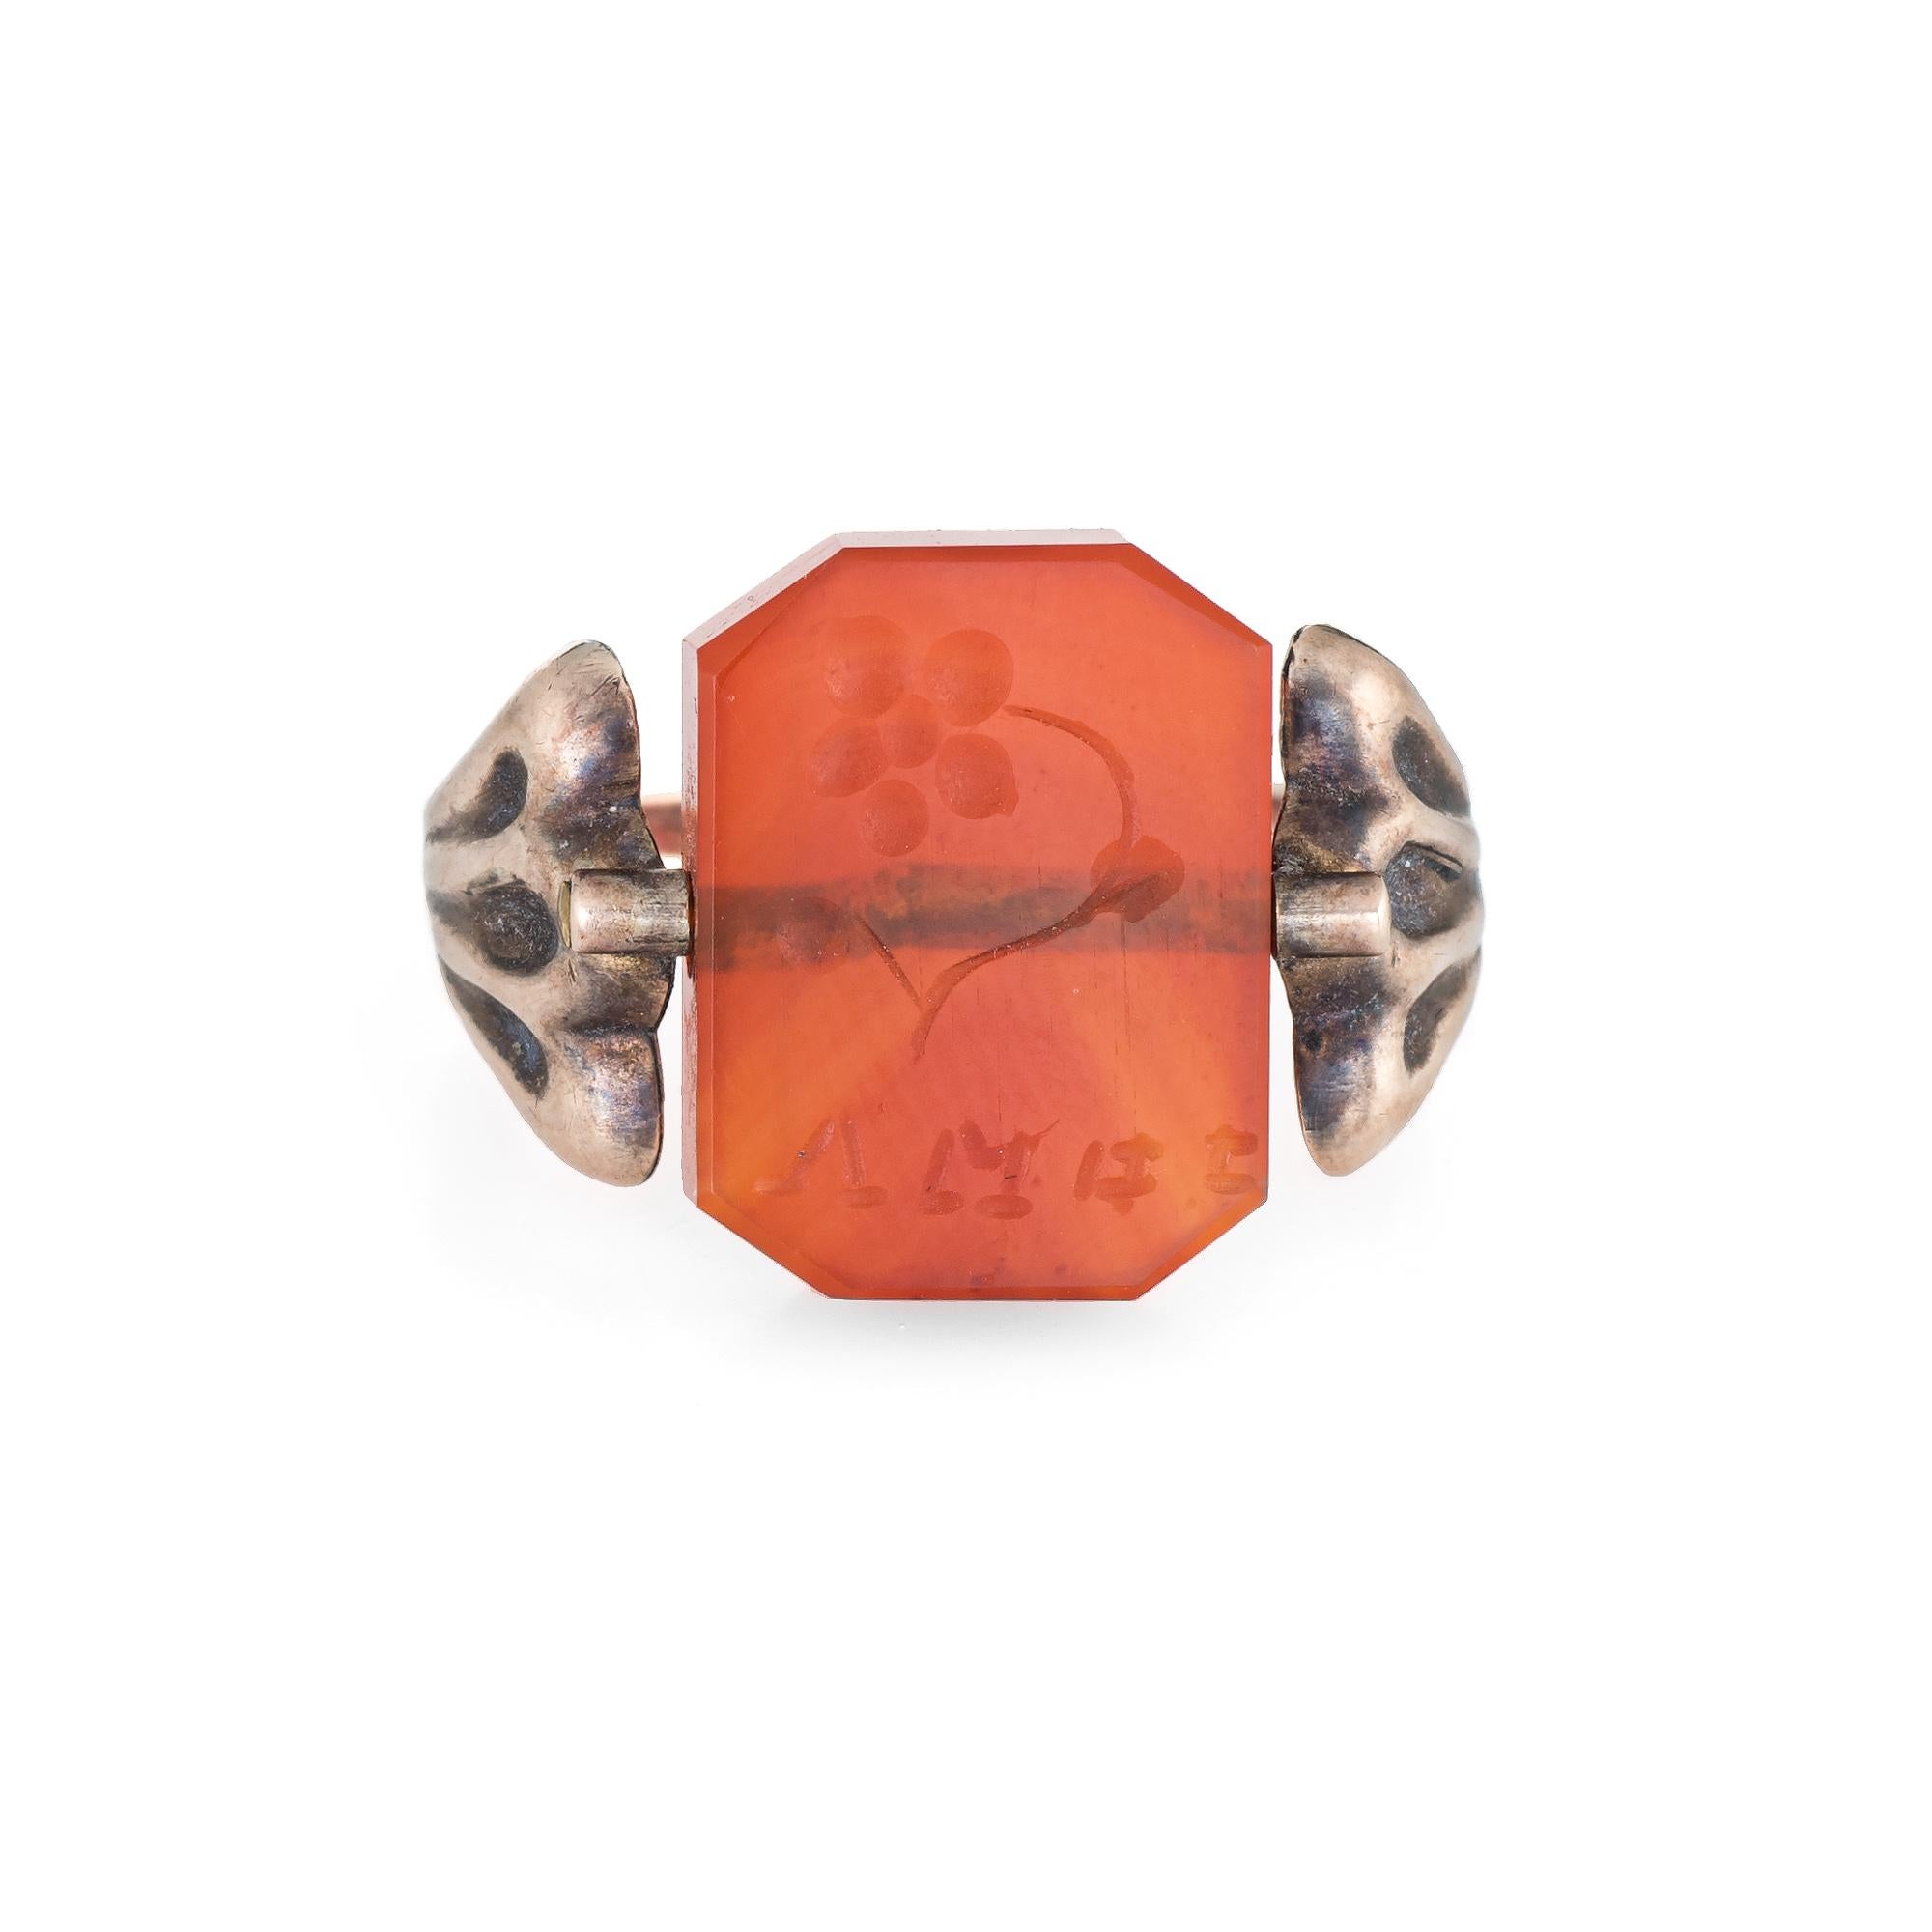 Finely detailed vintage Art Deco era ring (circa 1920s to 1930s) crafted in 10 karat rose gold. 

Carnelian measures 14mm x 11mm (in excellent condition and free of cracks or chips). 

The unique ring features a piece of carnelian etched with 